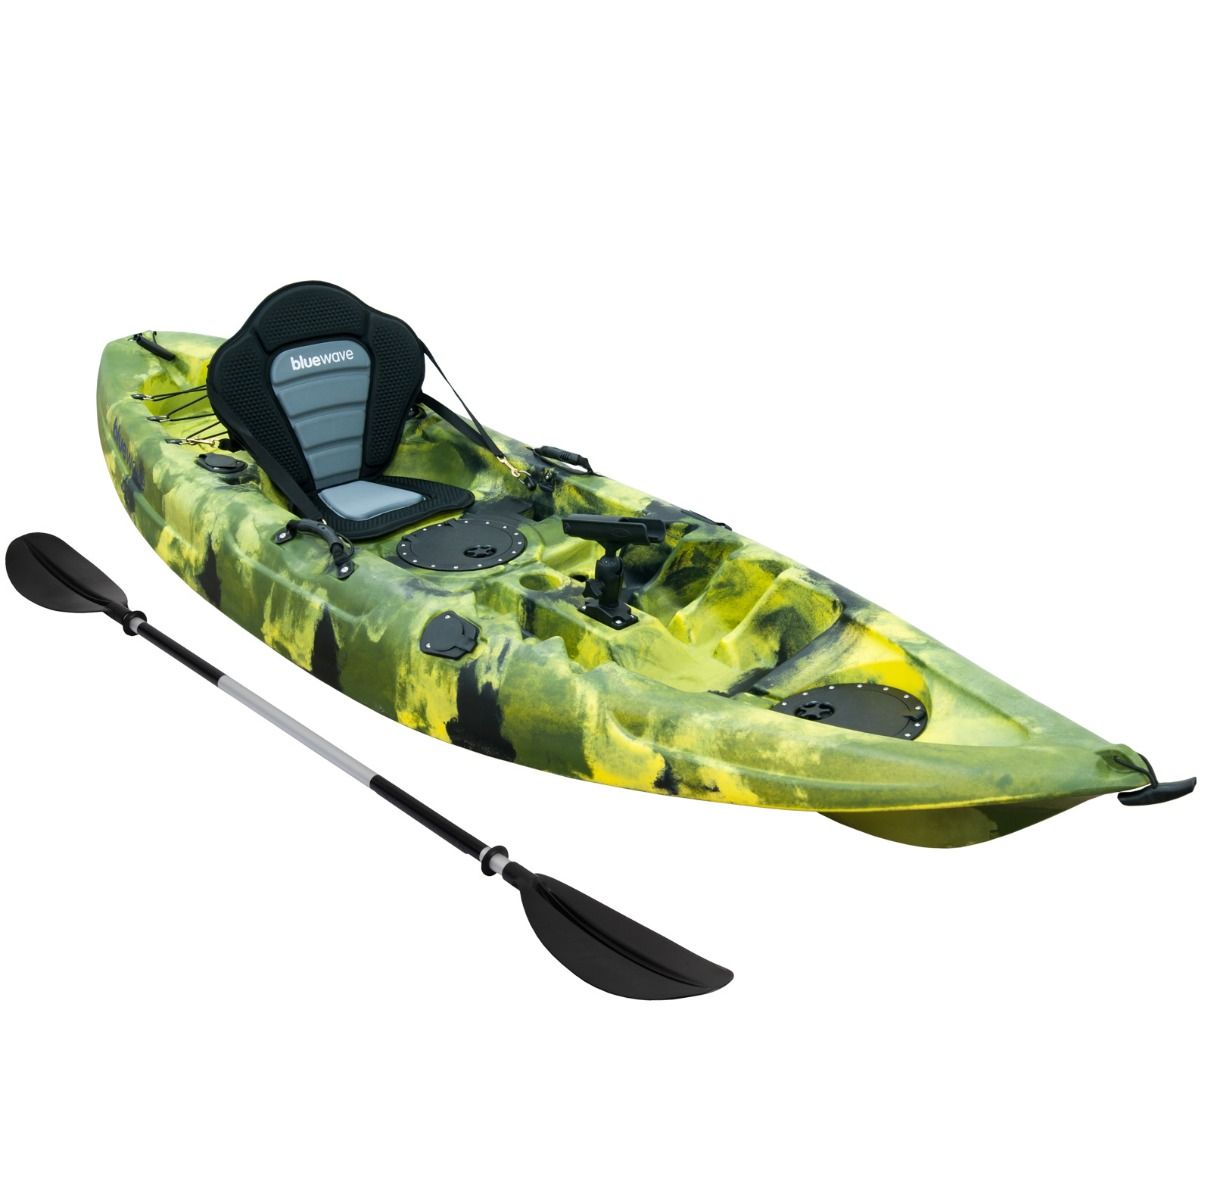 Bluewave Crest Sit On Top Fishing Kayak Package - Lightweight and Durable  Kayak for Anglers - Includes Paddle and Seat - Order Now!